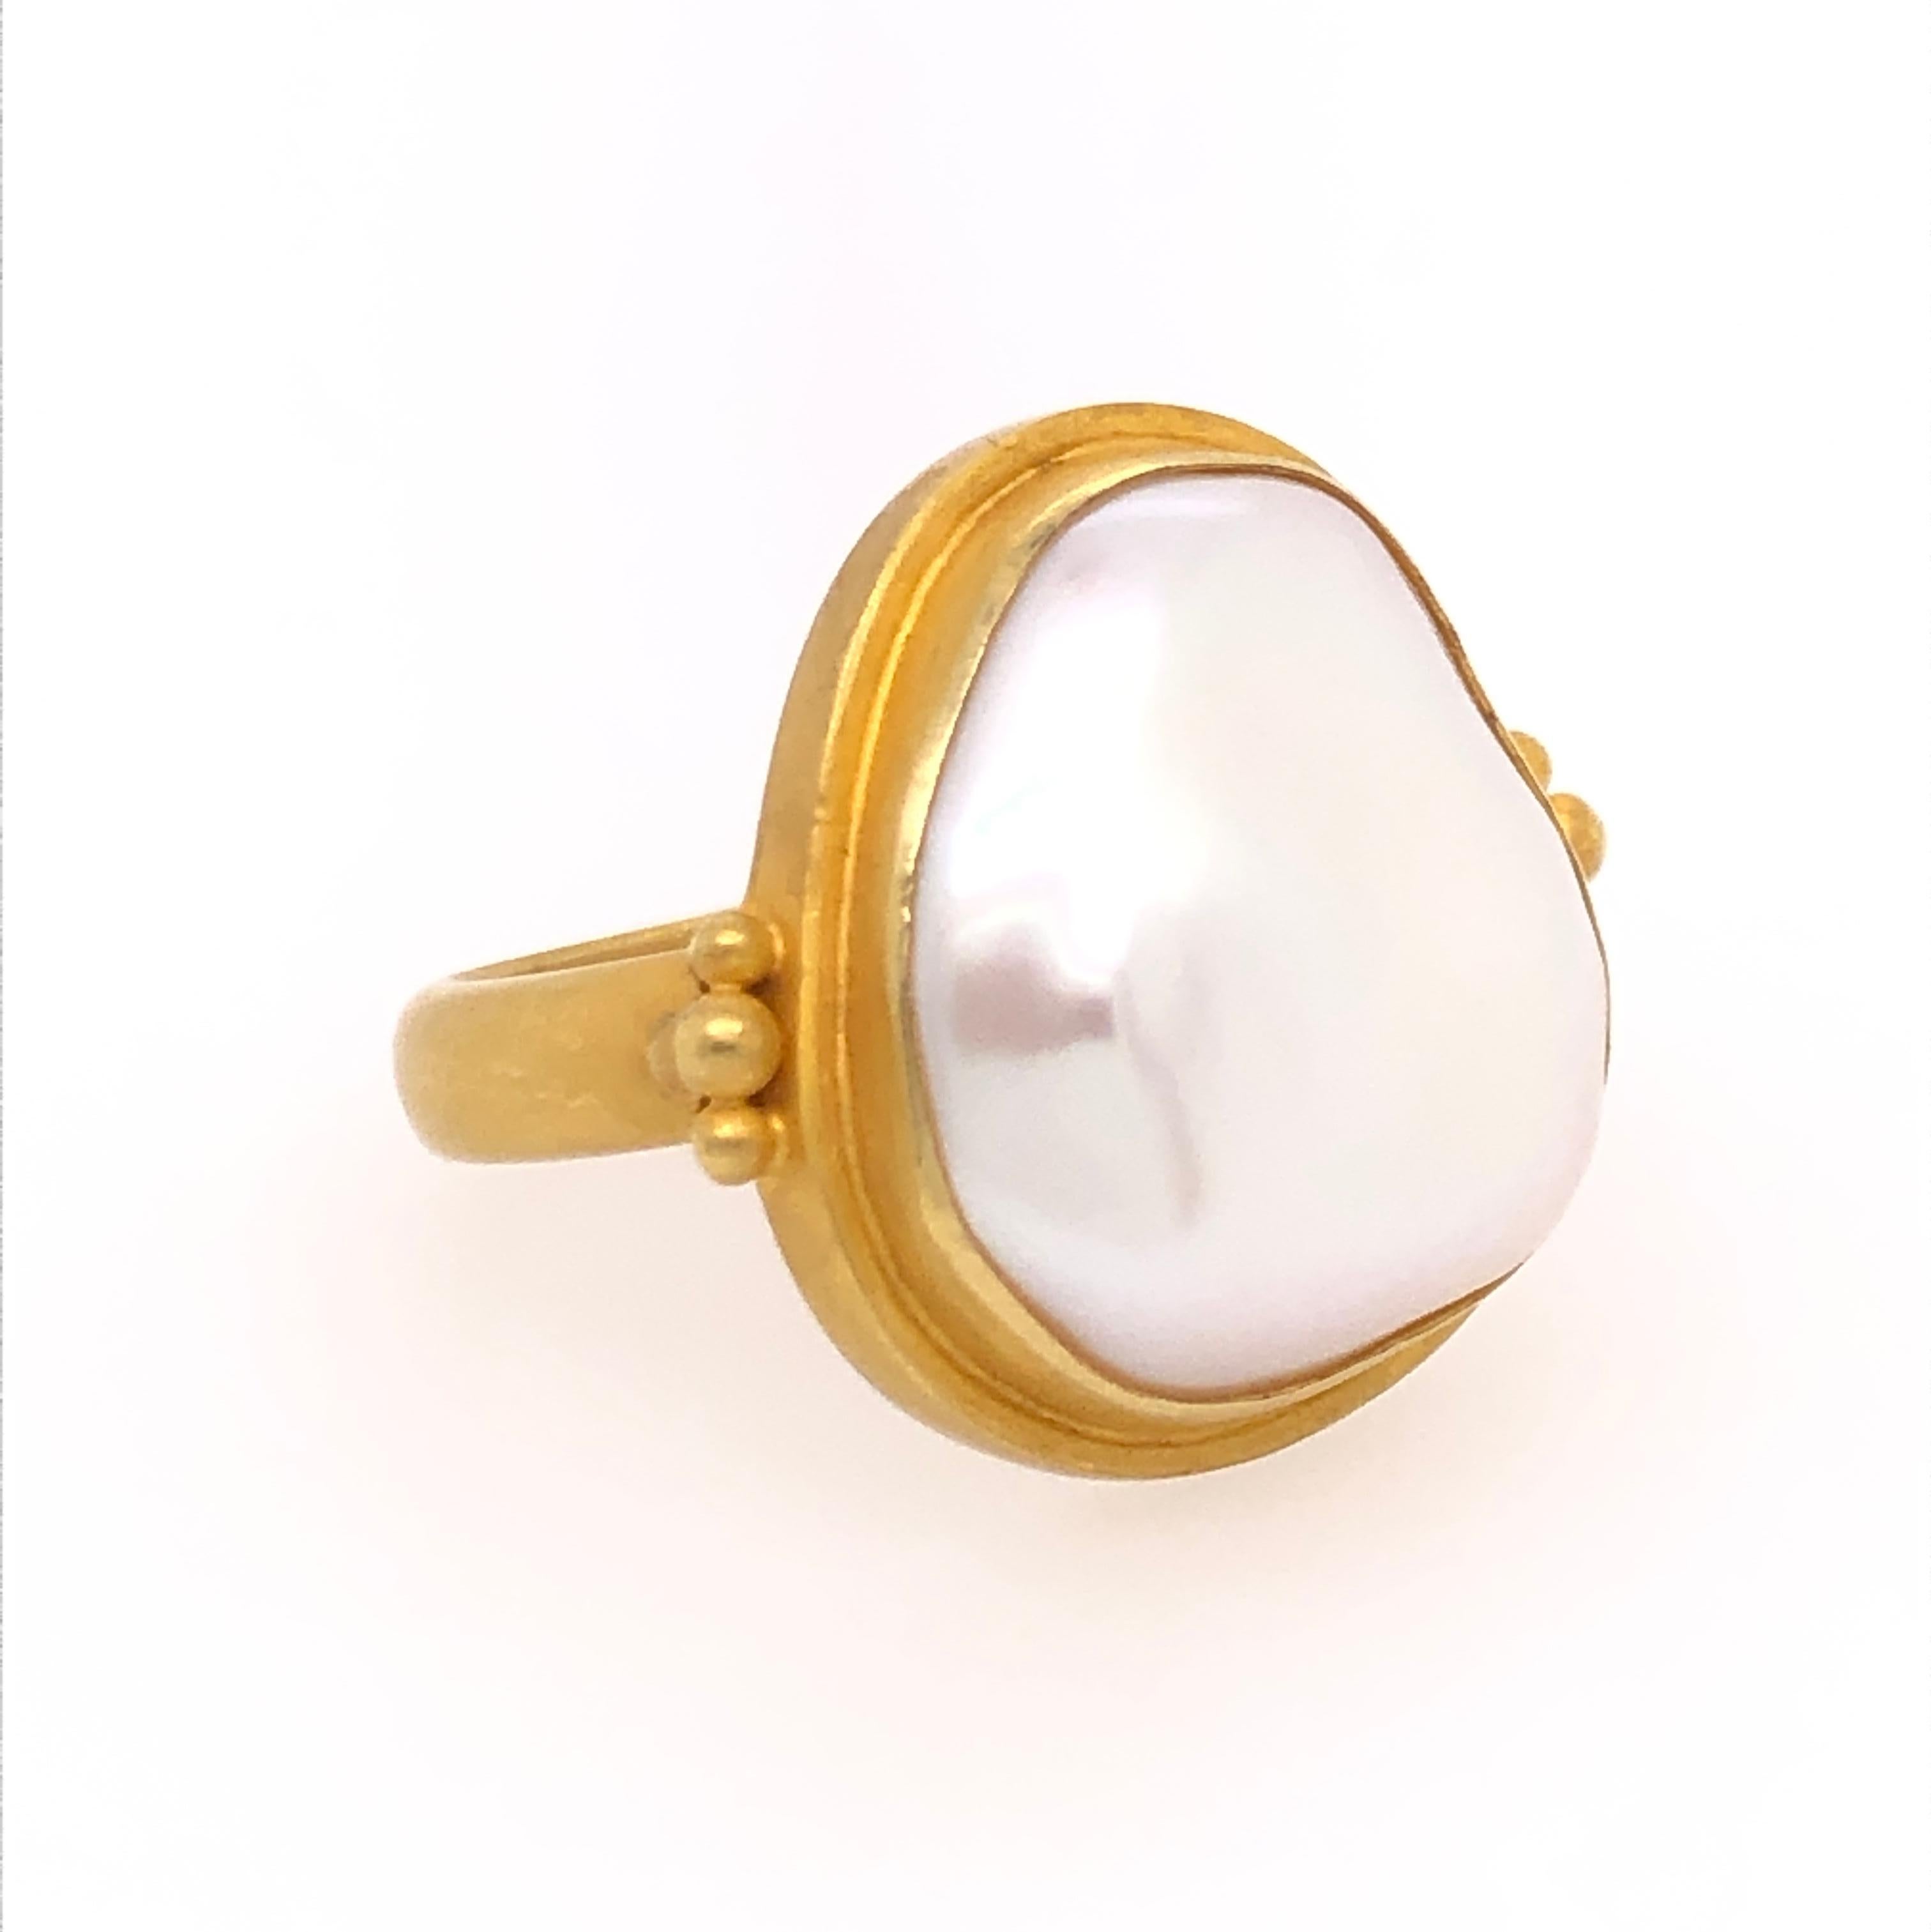 For my bohemian hearts, the beauty of this make pearl ring is in its irregularity. Kimarie designed the 18 karat yellow gold ring around the 17mm x 19mm Mabe pearl. The minimal accents of gold bring the viewer's eye directly to the Mabe pearl's